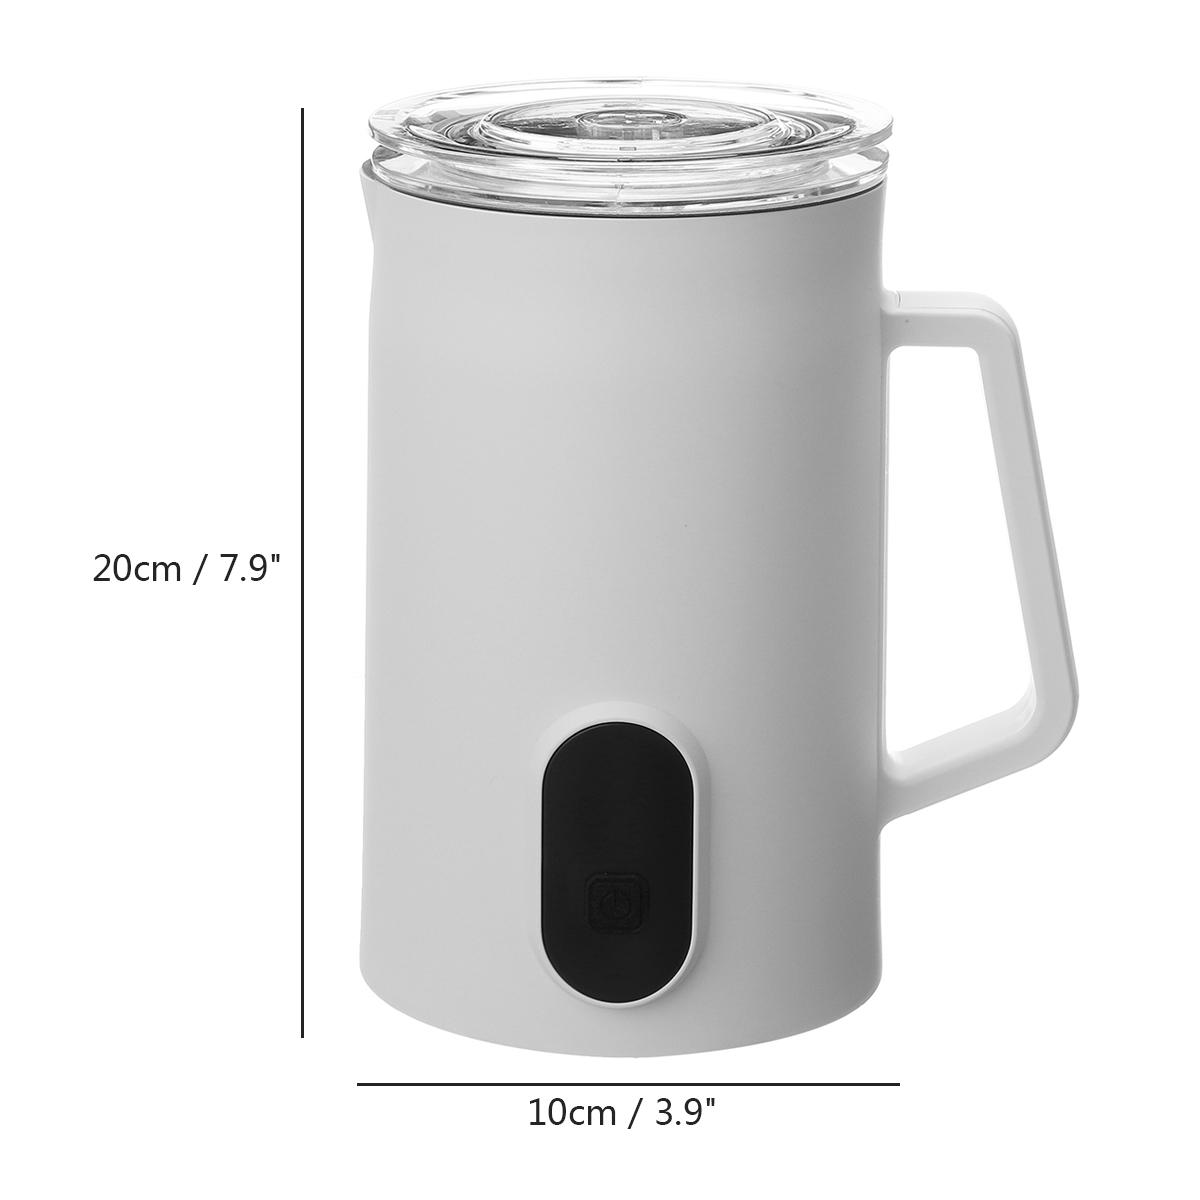 400W-220V-4-in-1-Milk-Frother-Hot-and-Cold-Modes-Coffee-Frother-for-Cappuccino-Latte-Chocolate-Milk-1931686-8